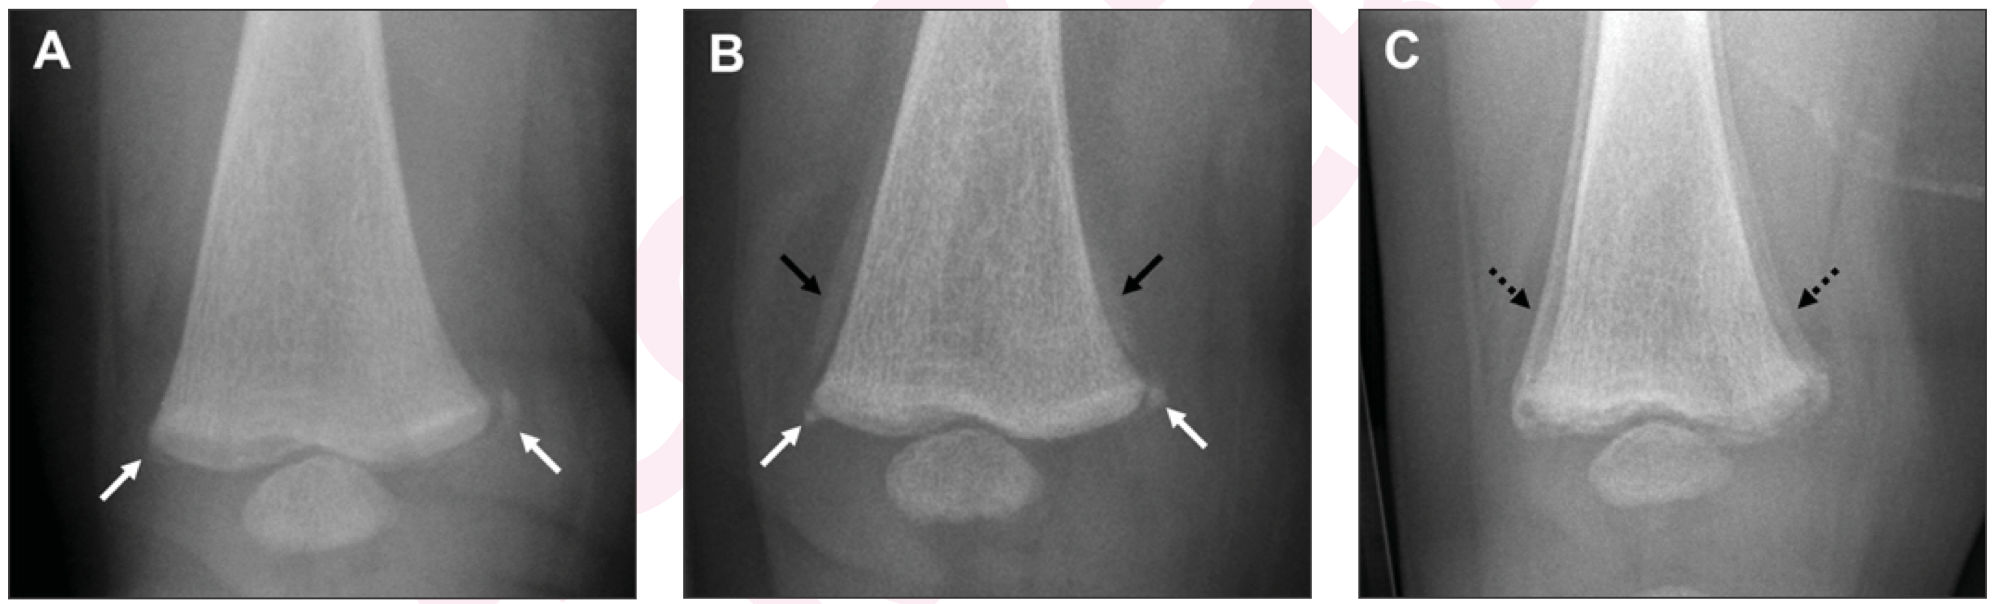 Anterior-posterior radiographs of the right femur of a 4-month-old girl not moving her right leg. Chest bruises were also present. A classic metaphyseal lesion (white arrows) was demonstrated at presentation (A). Subsequent perios- teal reaction (black arrows) with continued visualization of the classic metaphyseal lesion (white arrows) 6 days later (B); progression of healing (dotted black arrows) was observed 18 days following presentation (C).

Credit: American Journal of Roentgenology